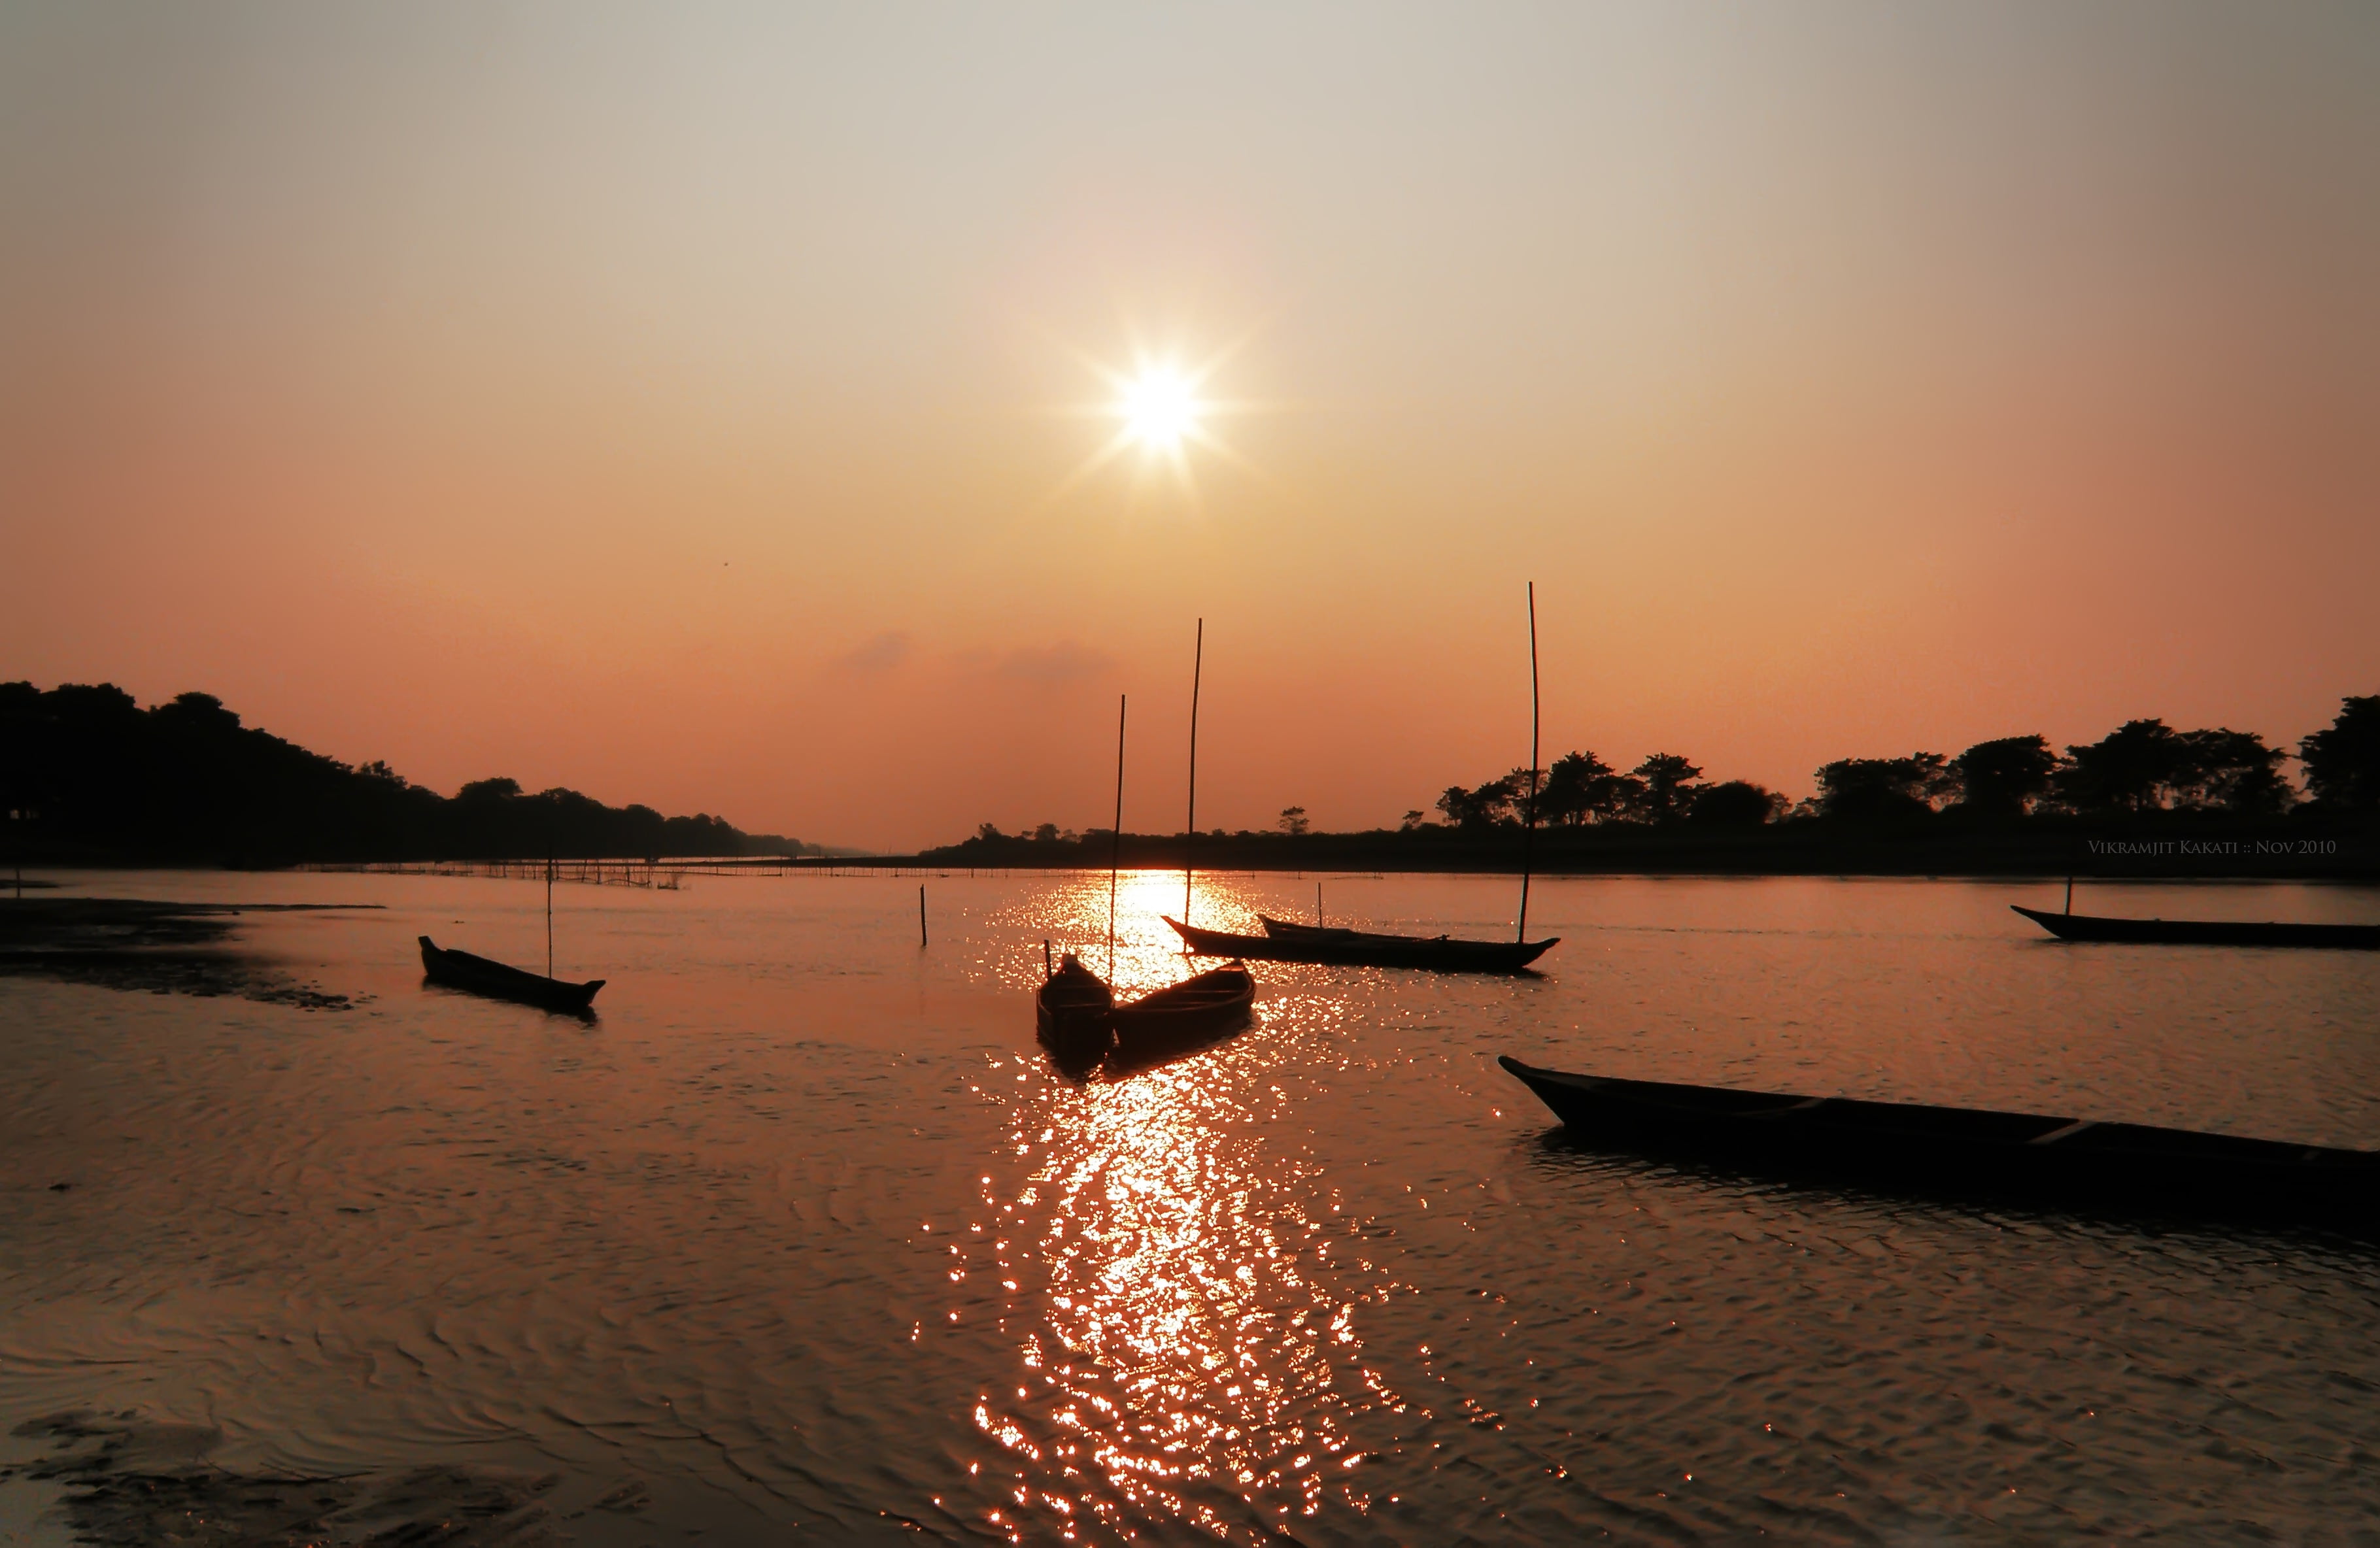 boat on body of water during sunset, landscape, assam, india